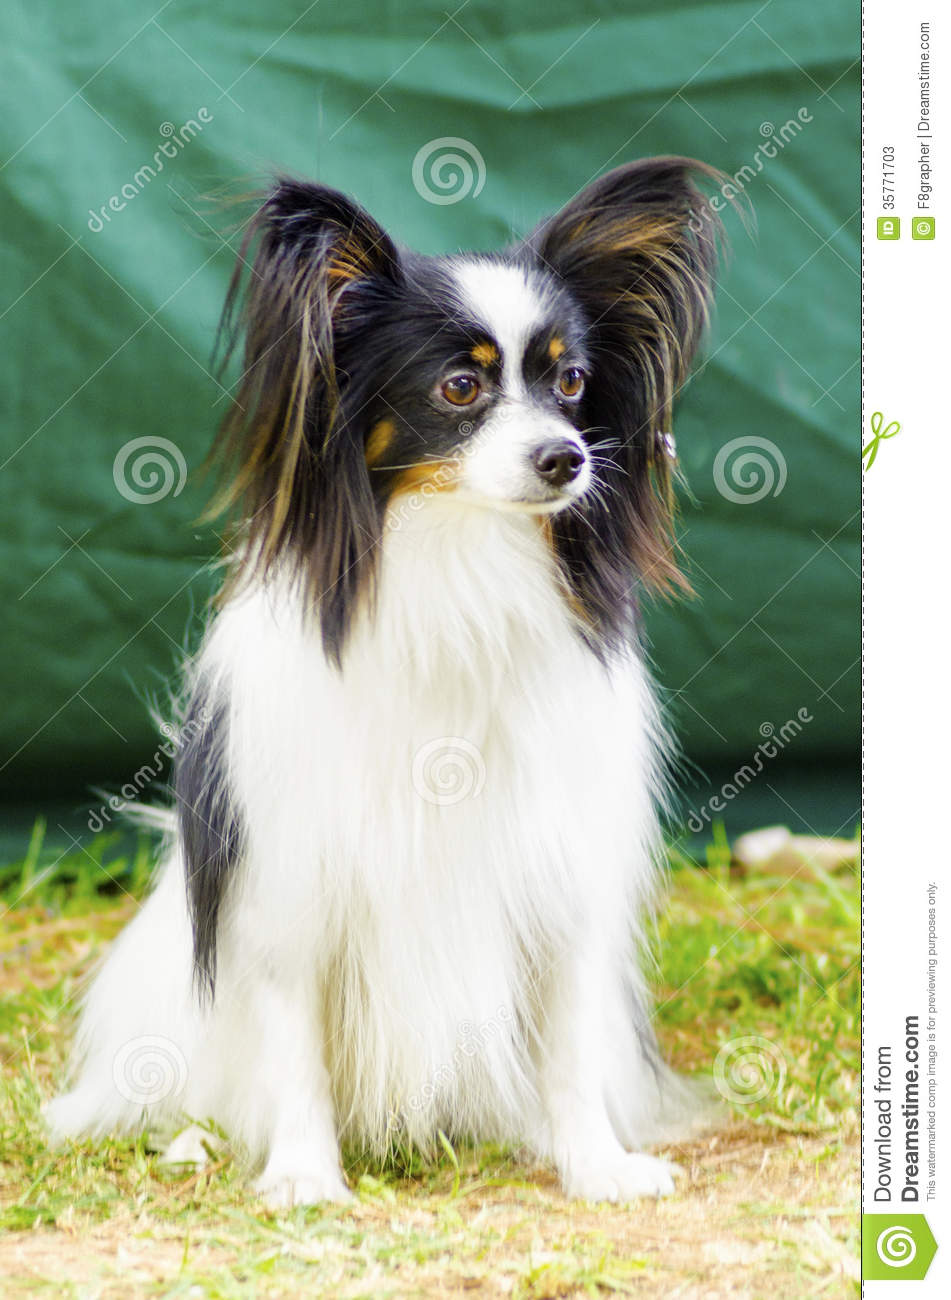 Awesome Black And White Papillon Dog Sitting